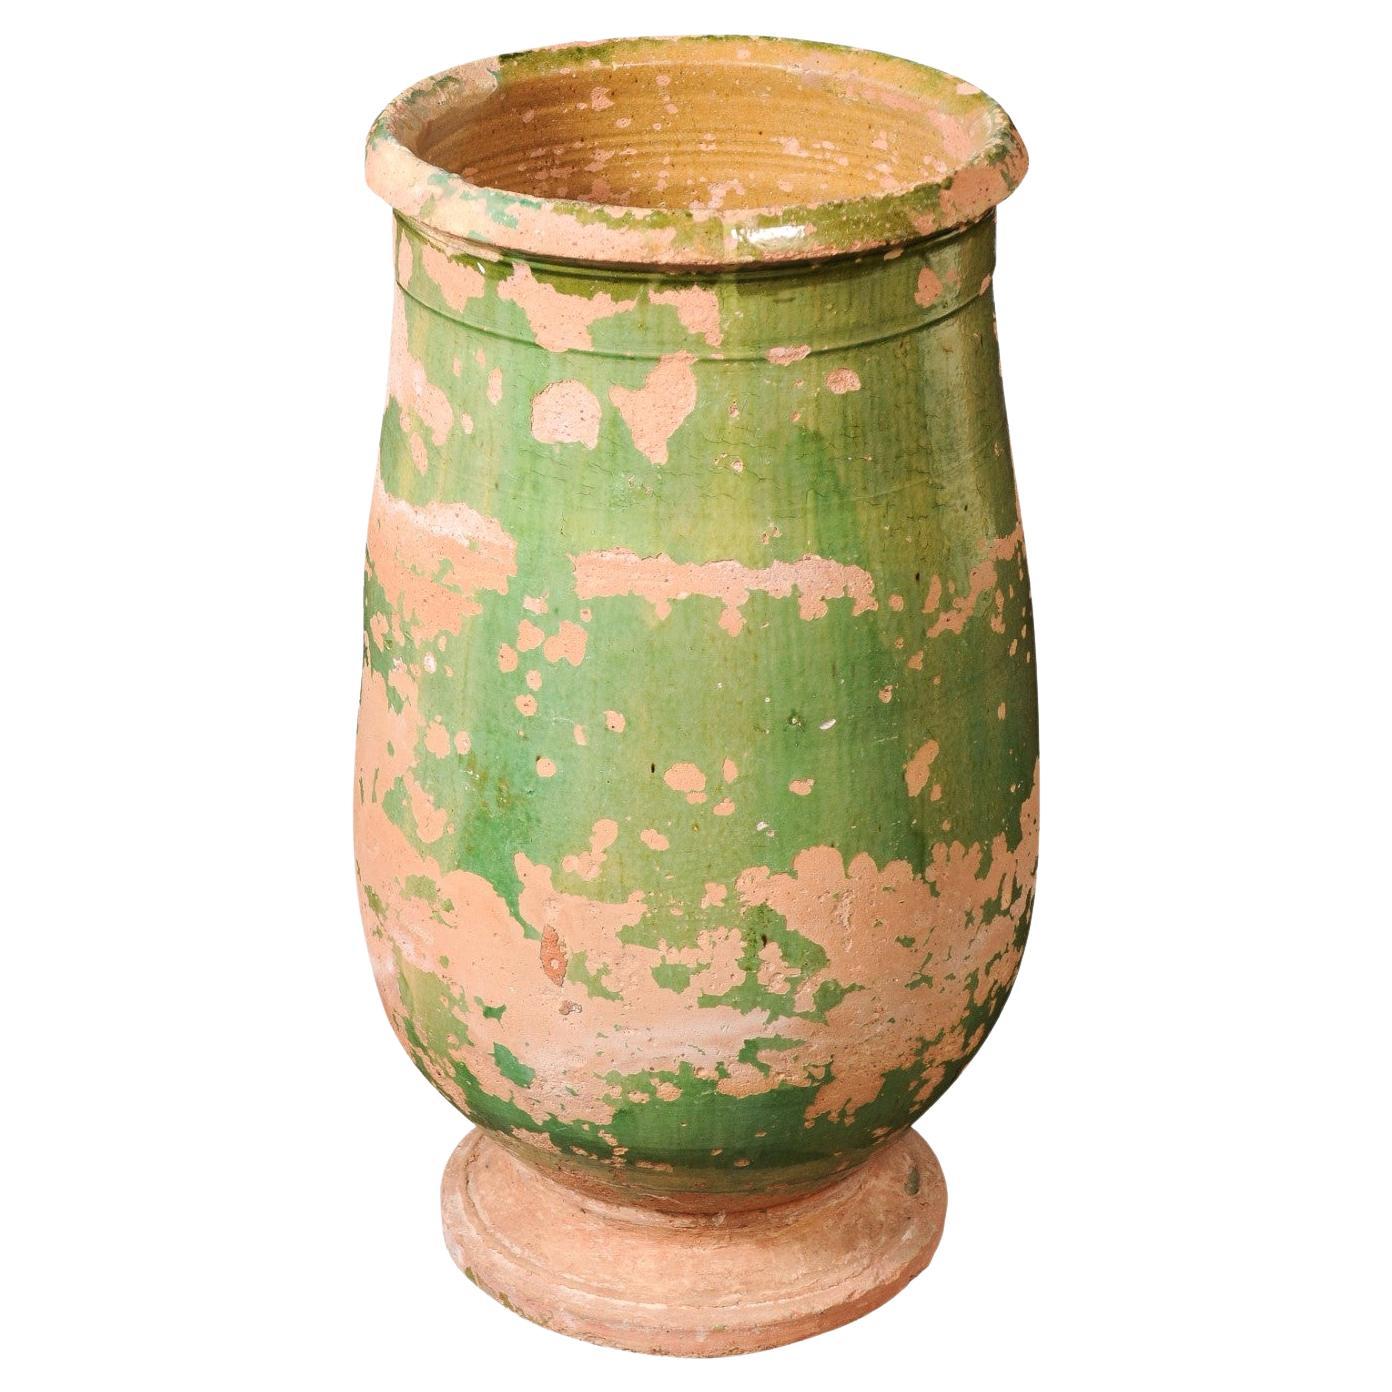 French Provincial 1880s Green Glazed Oblong Terracotta Jar with Weathered Patina For Sale